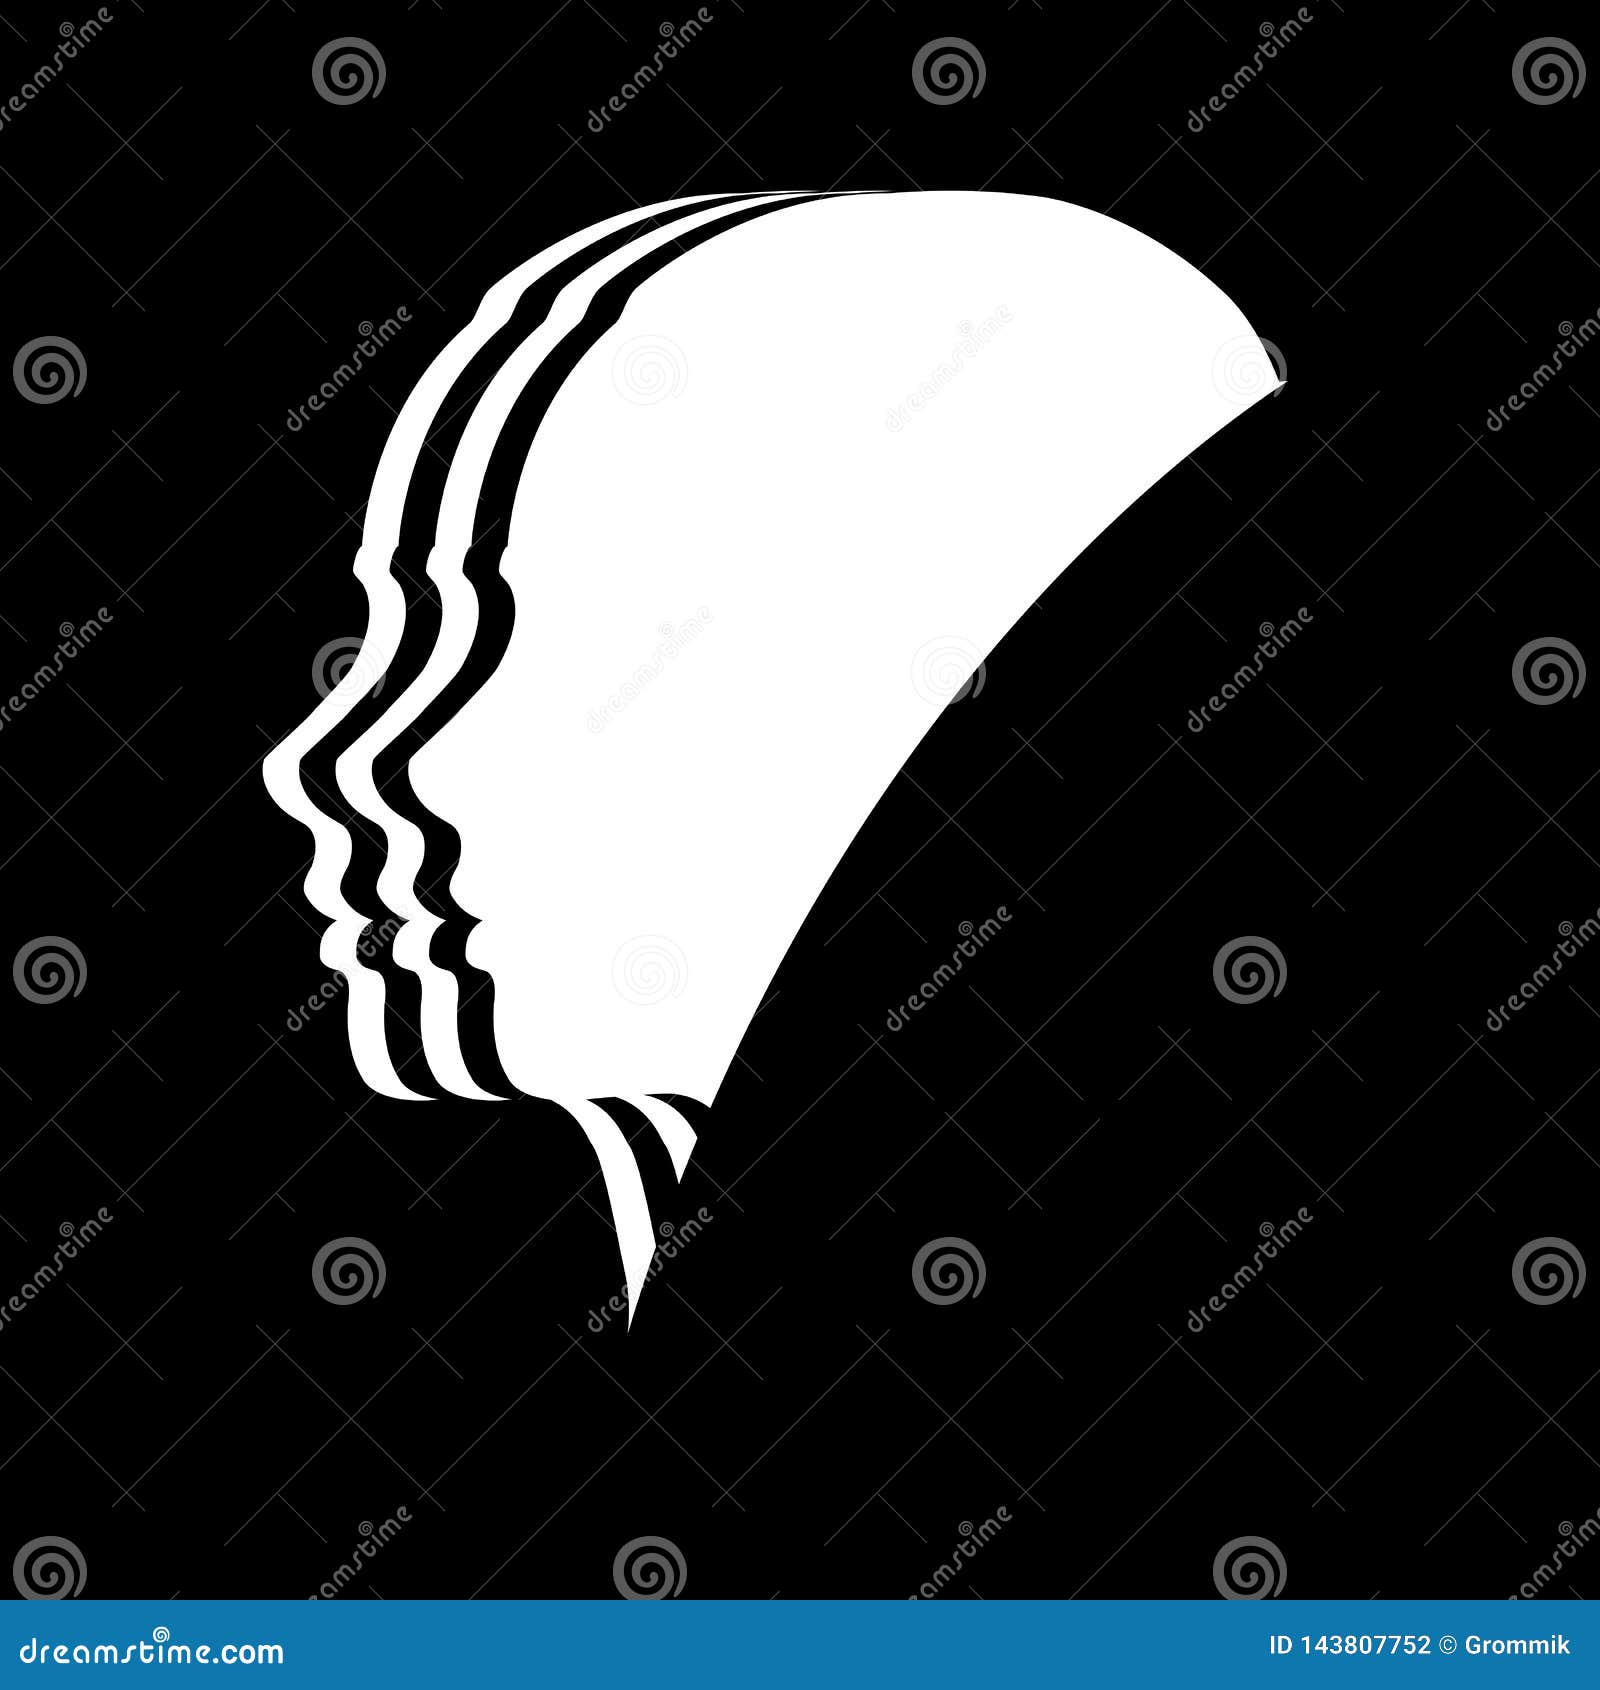 Black and White Silhouette of Female Face on Black Background Stock ...